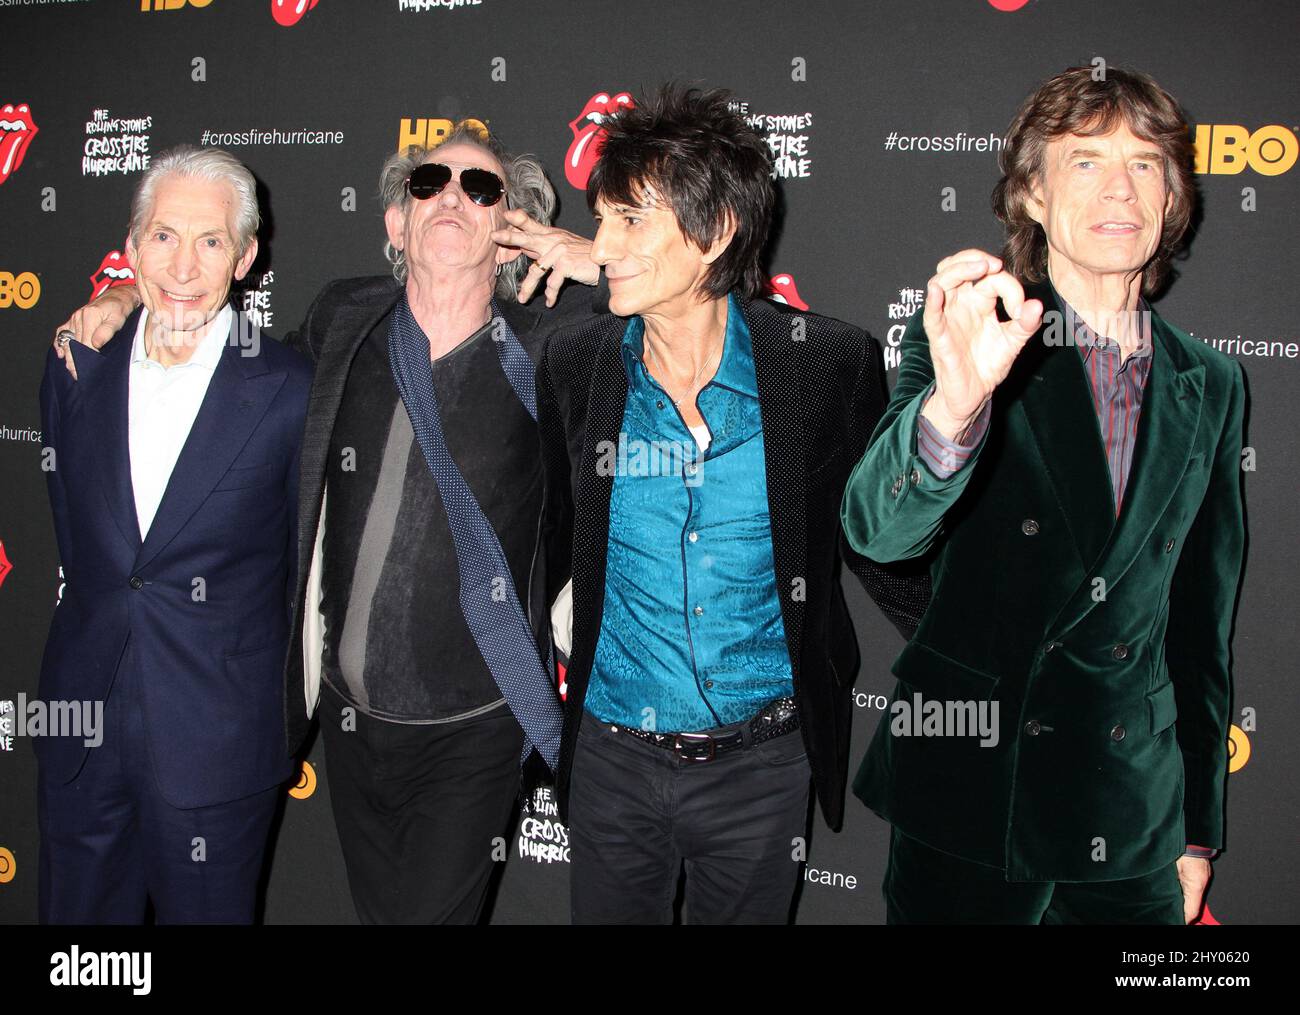 Charlie Watts, Ronnie Wood, Keith Richards and Mick Jagger attending a screening of 'Crossfire Hurricane' at the Ziegfeld Theater in New York City. Stock Photo